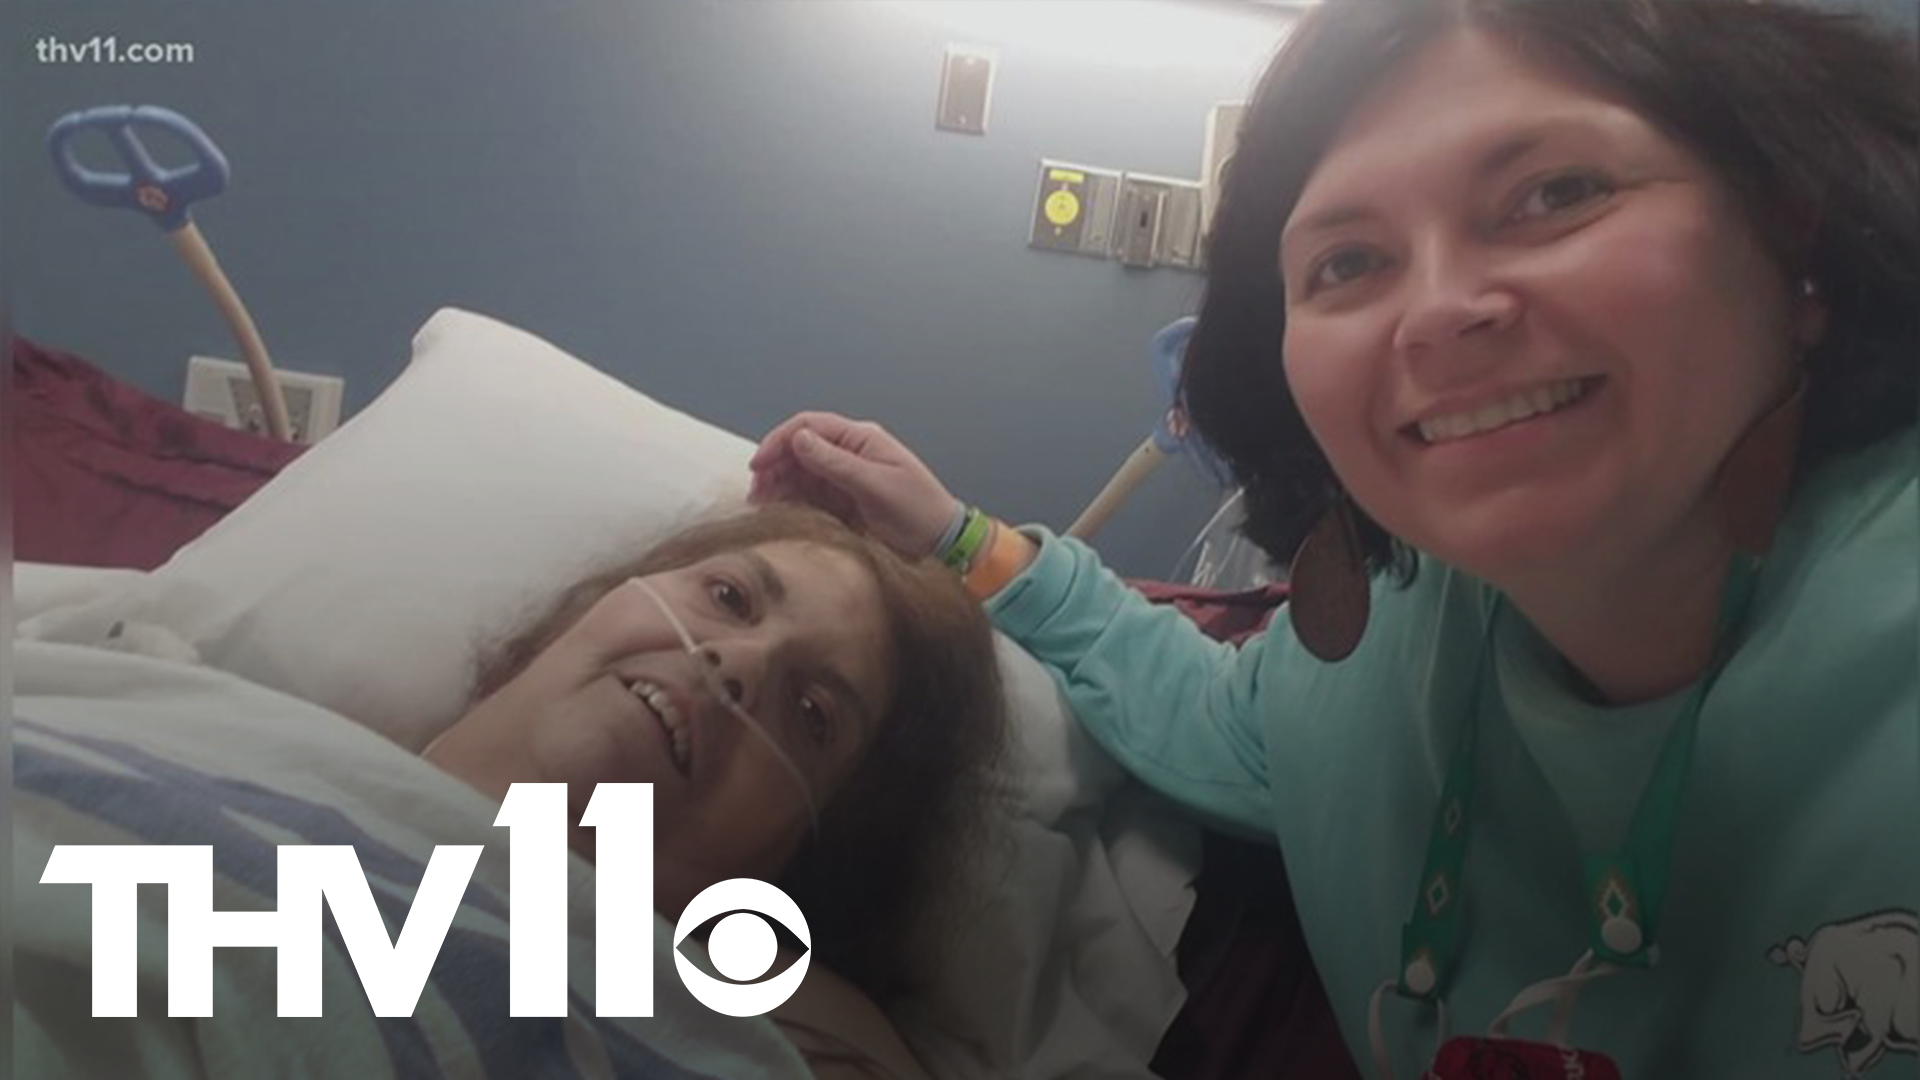 A Saline County woman, who was given just minutes left to live, has now officially survived COVID-19. The family is thankful, but still in shock.